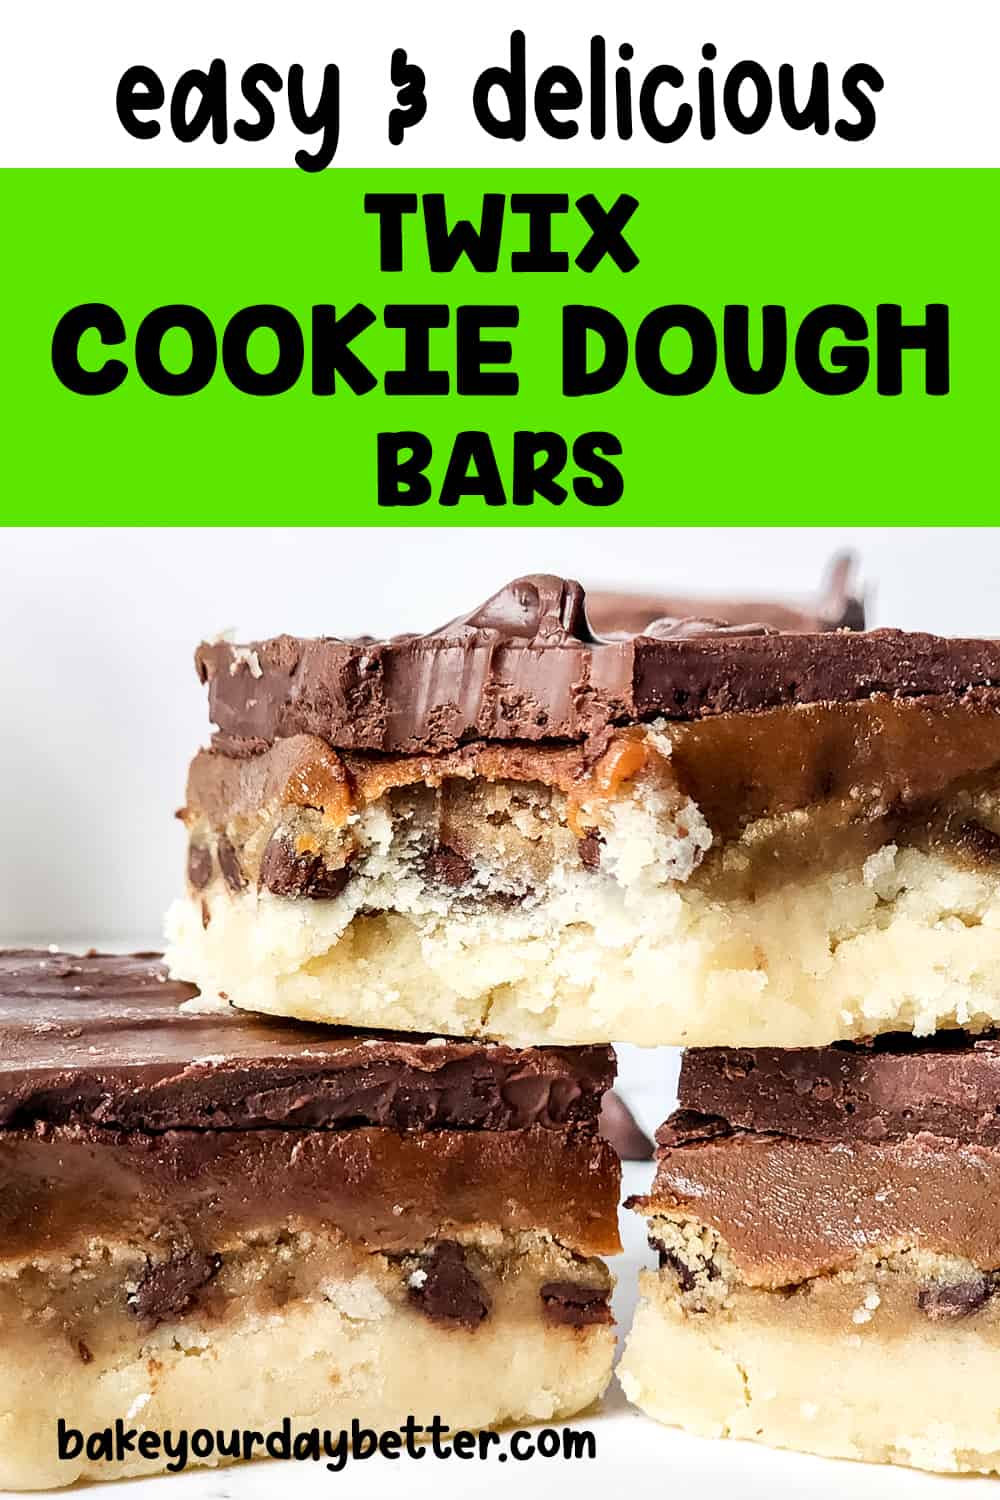 easy & delicious twix cookie dough bars (text overlay with stack of cut twix bars)